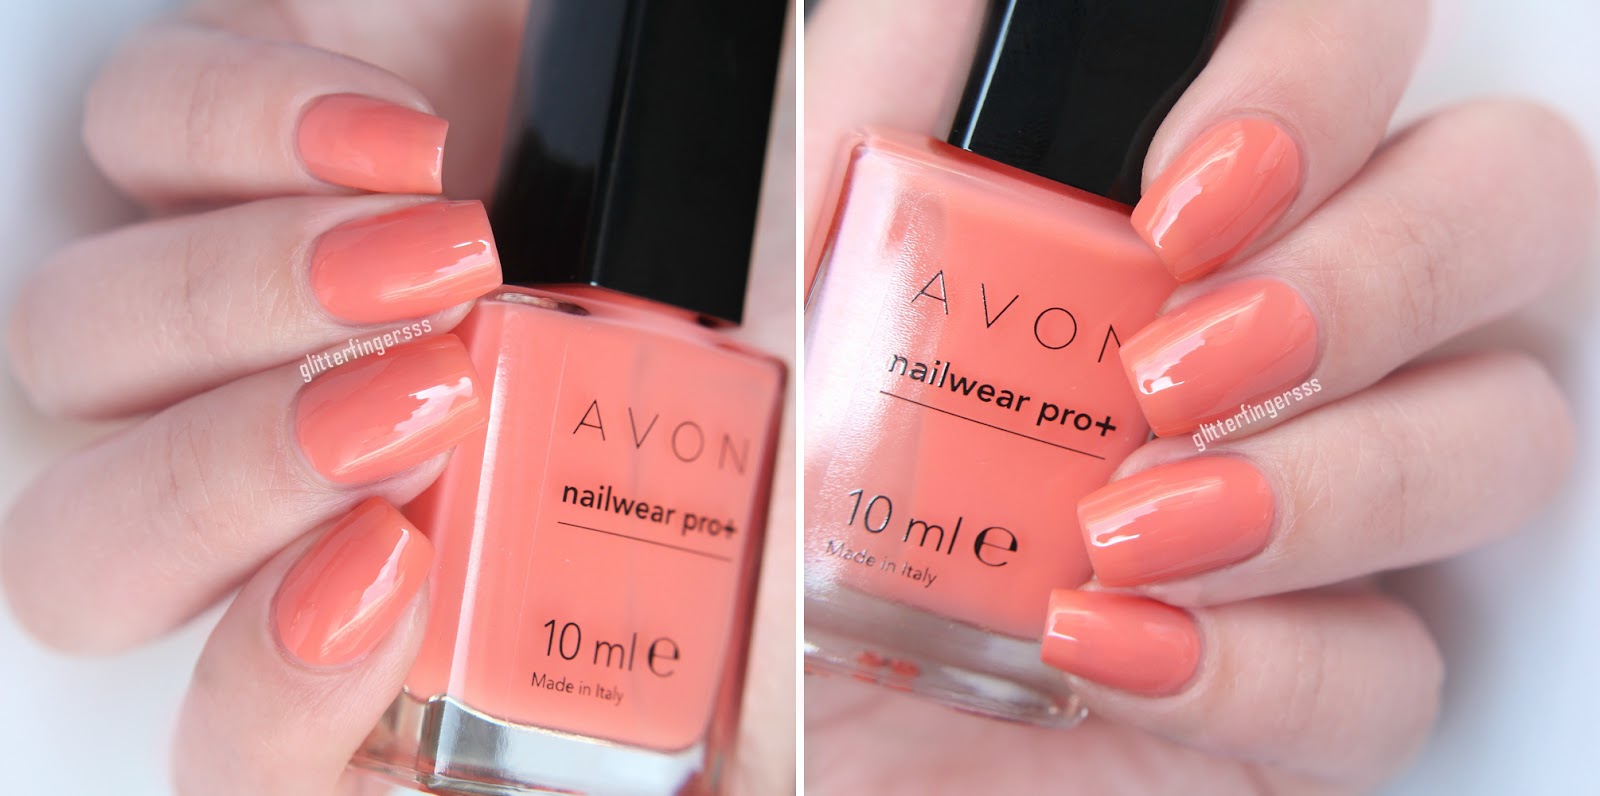 Currently On My Nails Avon Nailwear Pro Nail Enamel Shade Summer Peach:  Review, Swatches & NOTD | Cosmochics | Best Blogs for Fashion, Beauty,  Lifestyle and Parenting